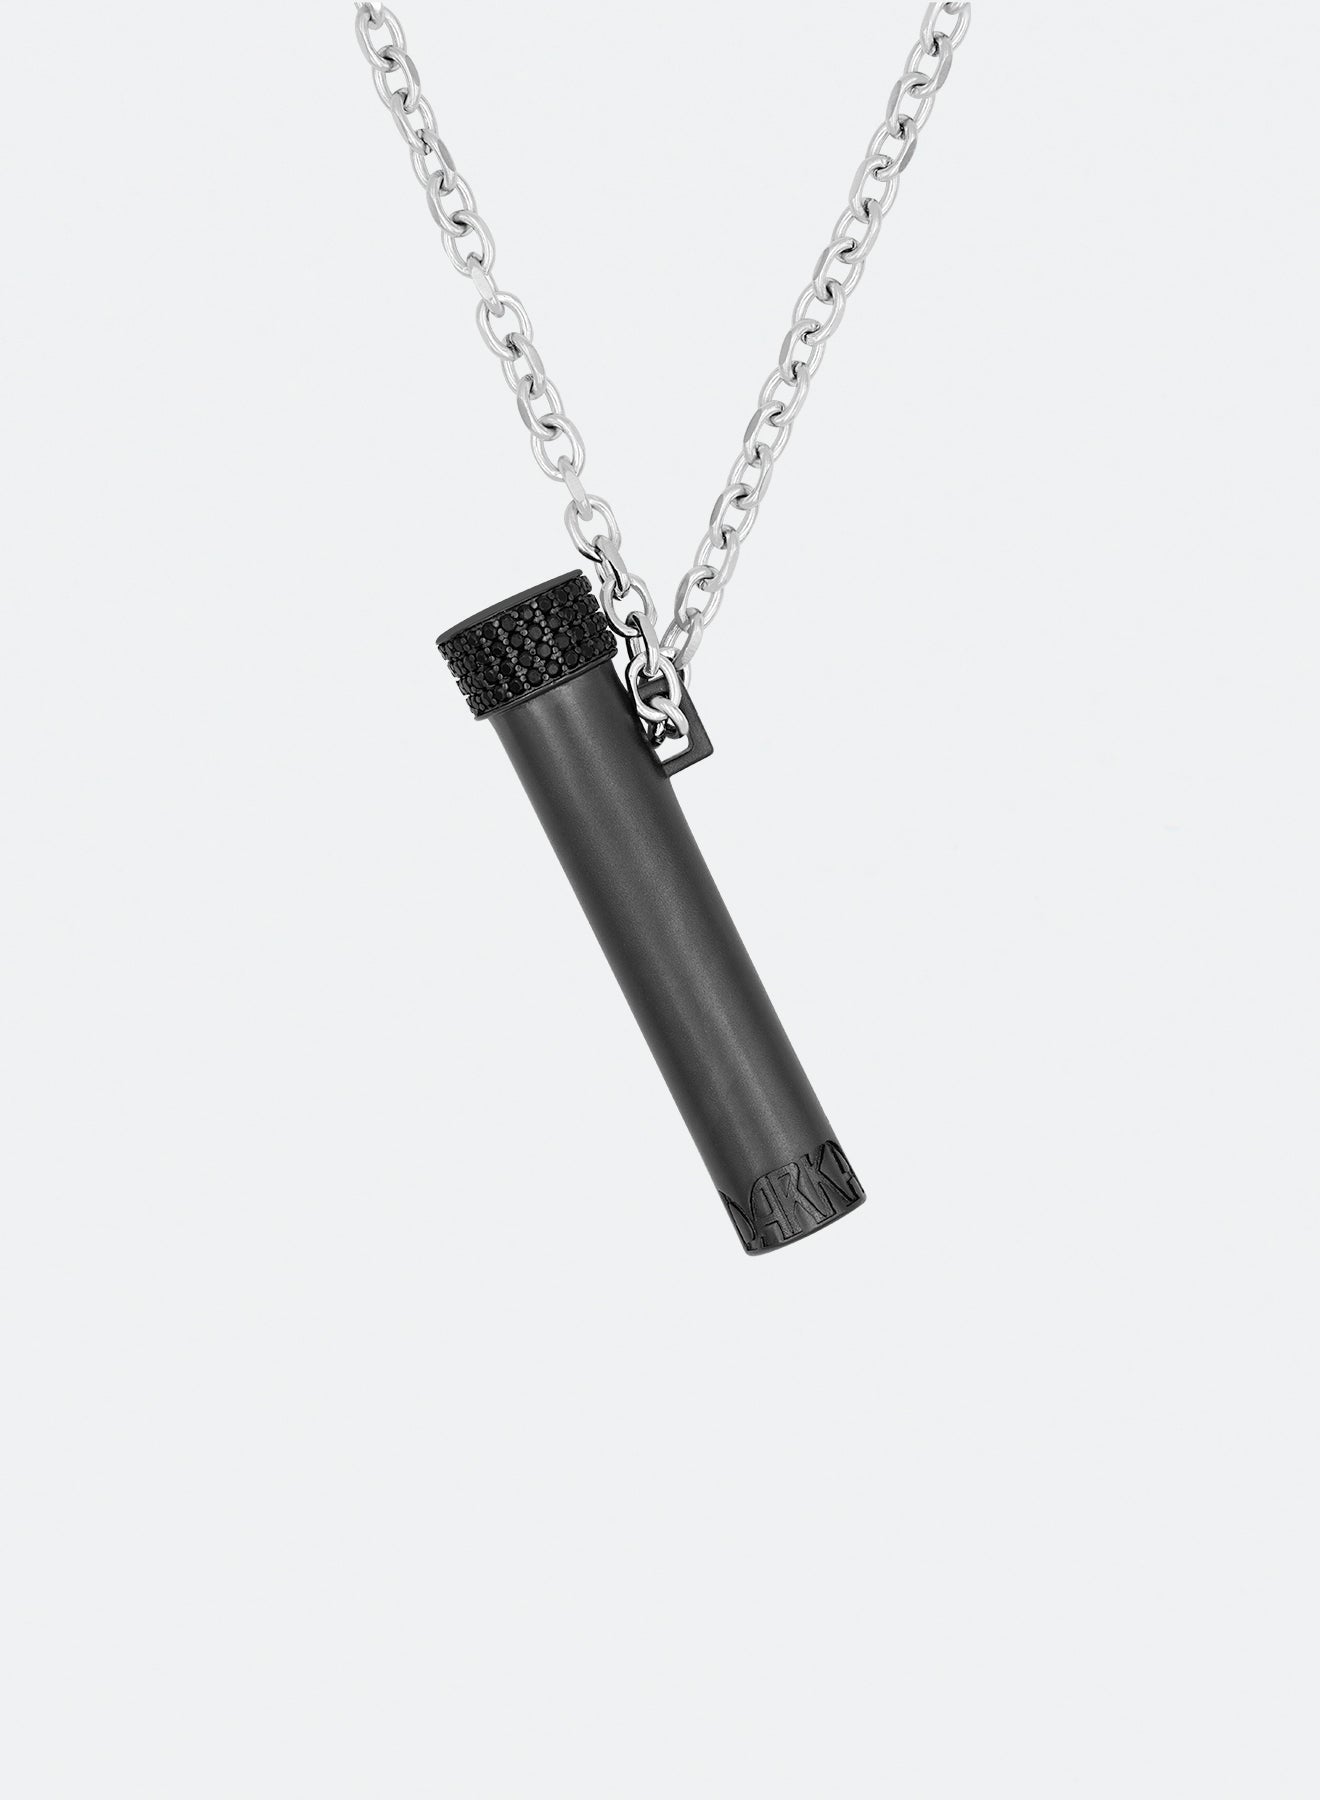 Black PVD coated vial pendant necklace with hand-set micropavé stones in black, matte/satined finishing and 3mm rolo chain